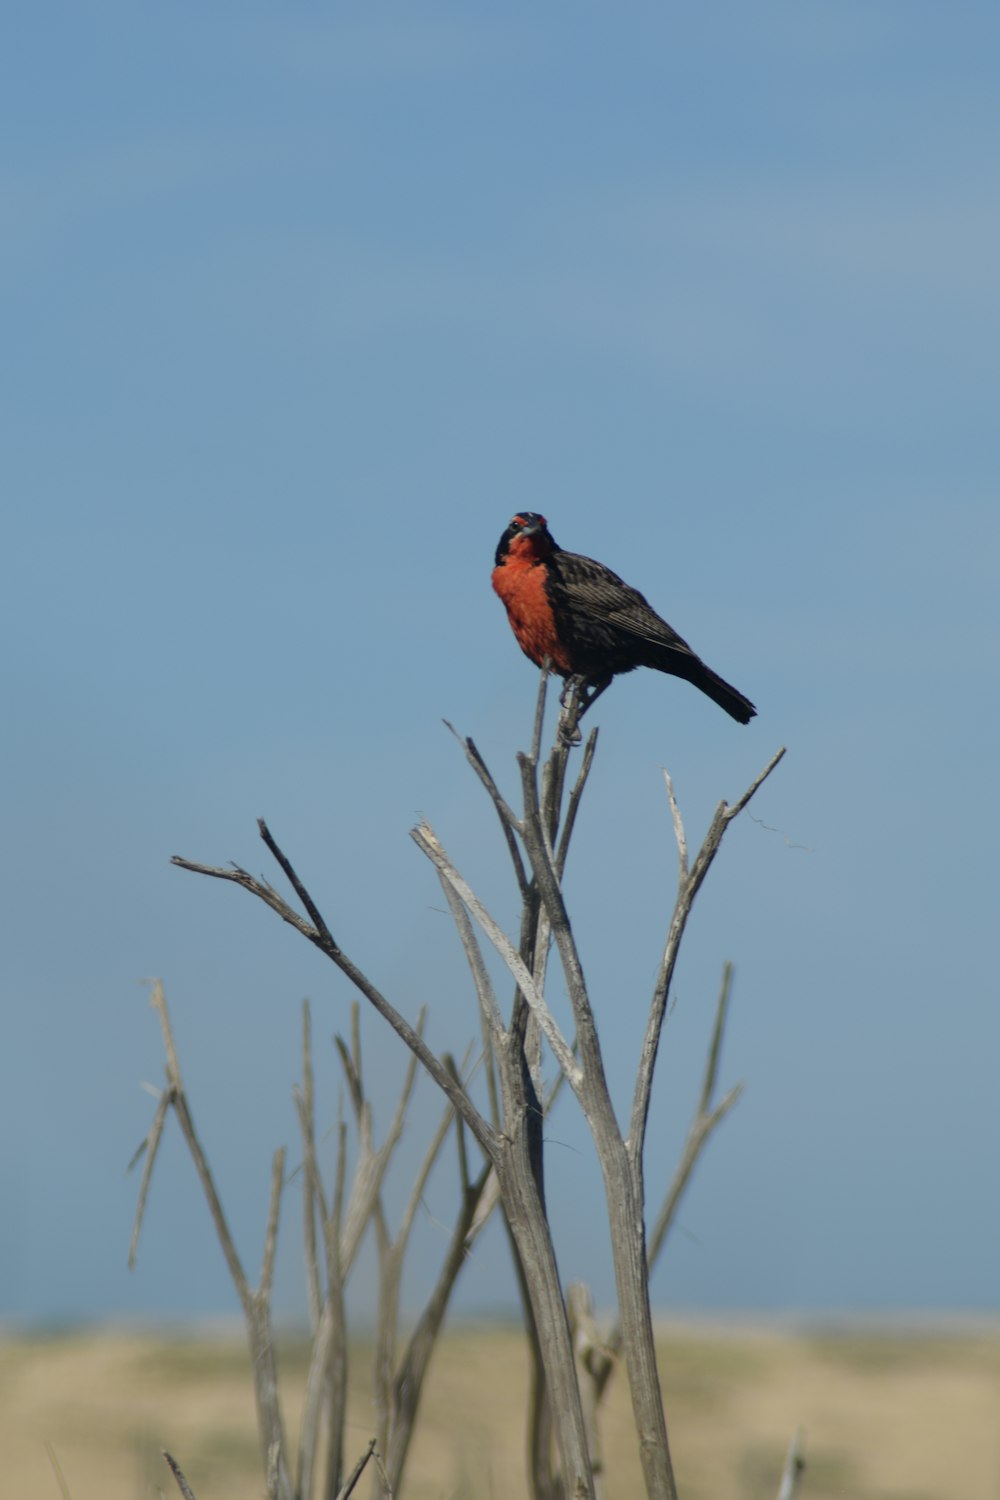 red and black bird on brown plant during daytime